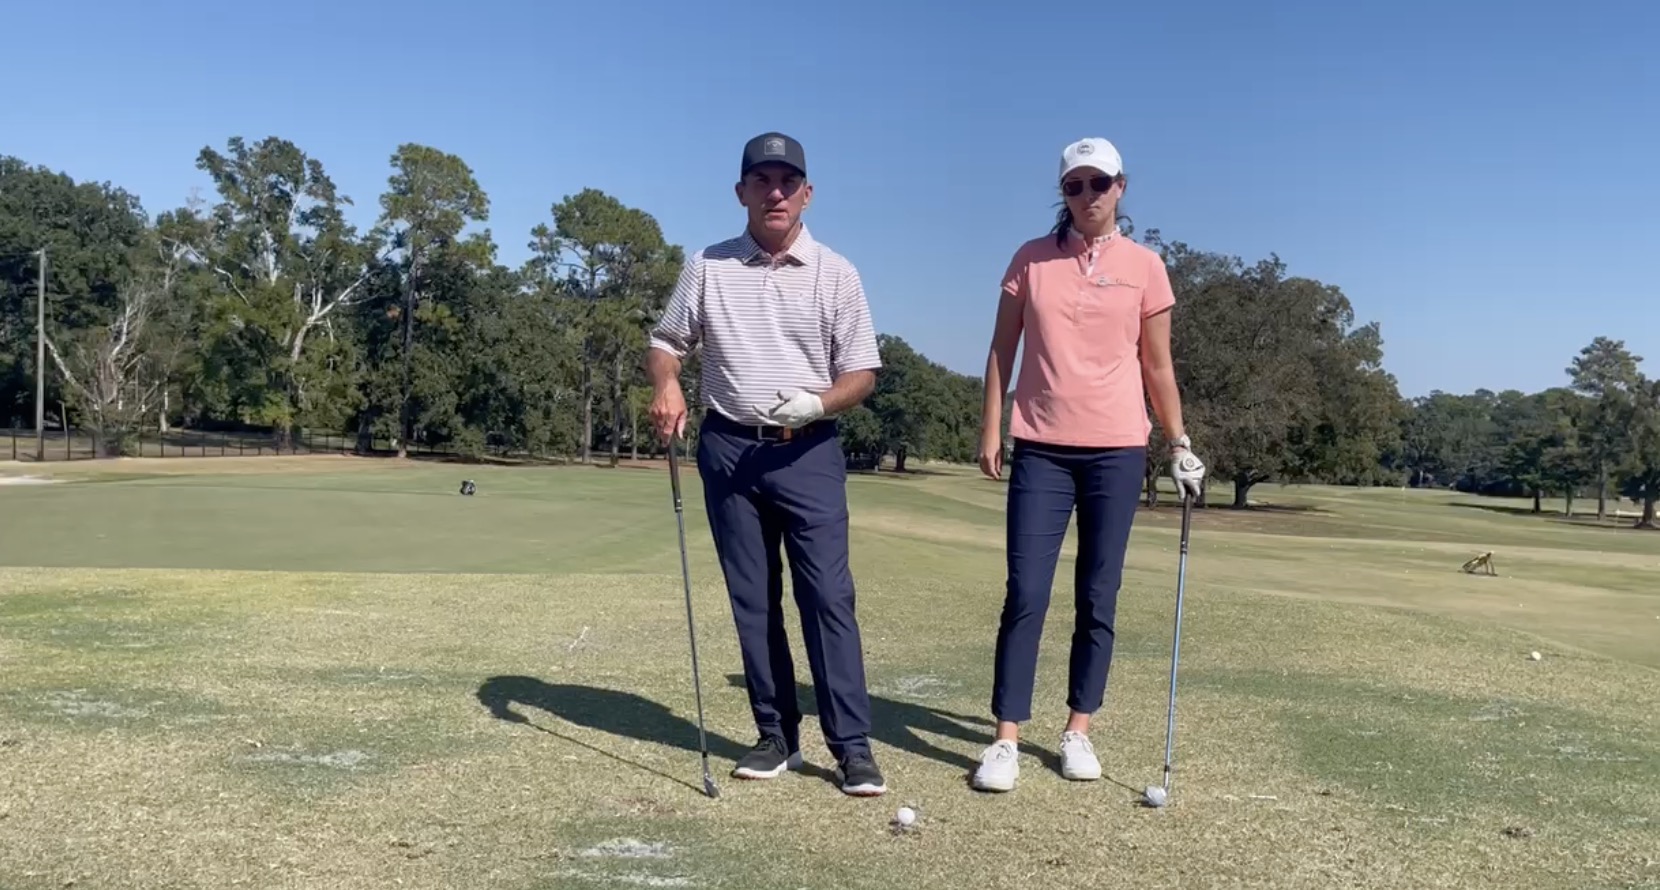 Relax And Improve Your Swing